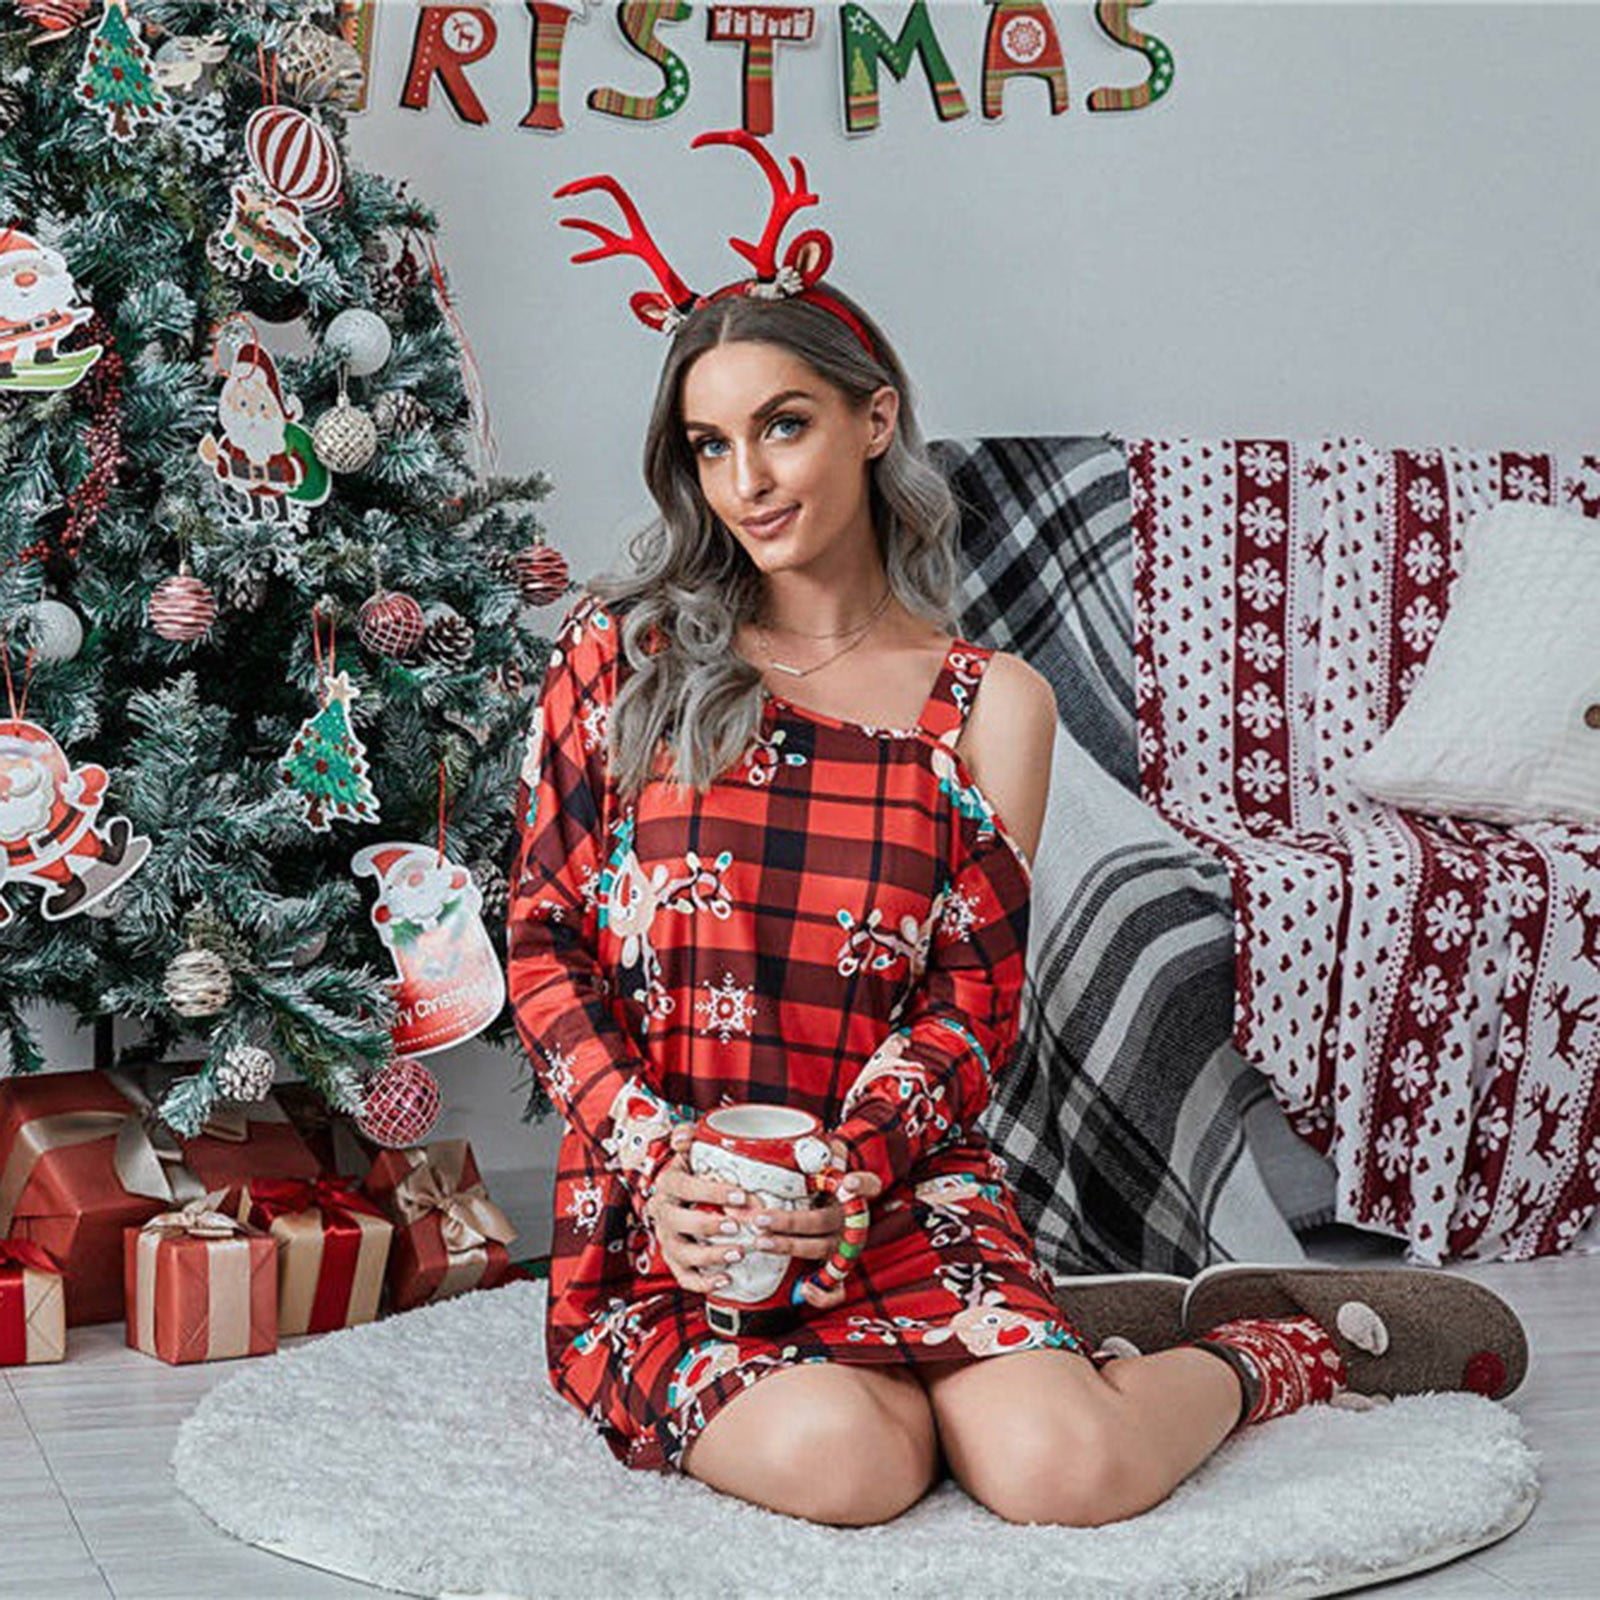 Christmas Party Outfit Ideas | Top 10 Christmas Party Outfit Ideas